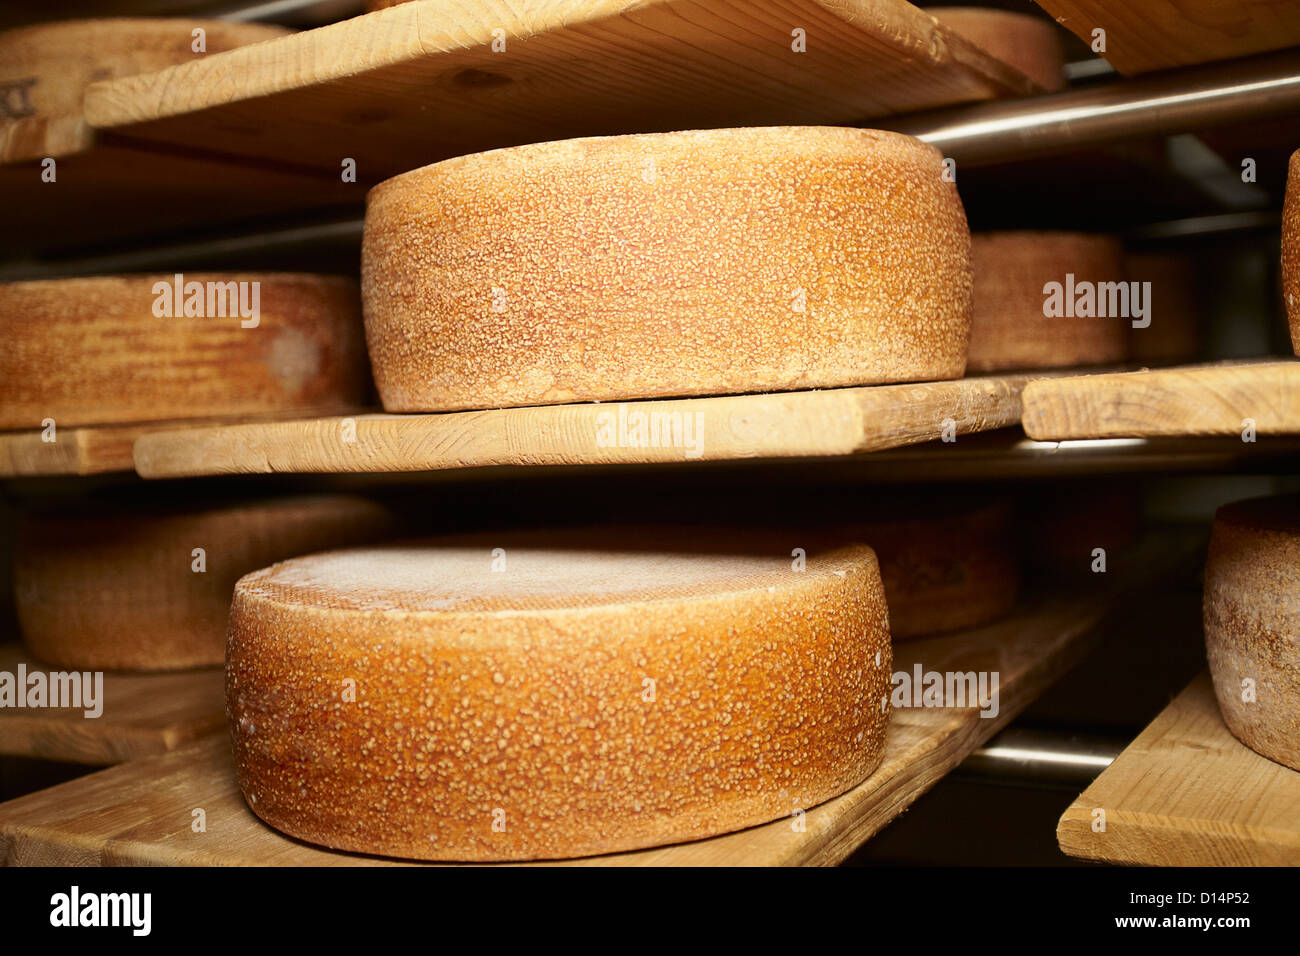 Wheels of cheese aging in shop Stock Photo